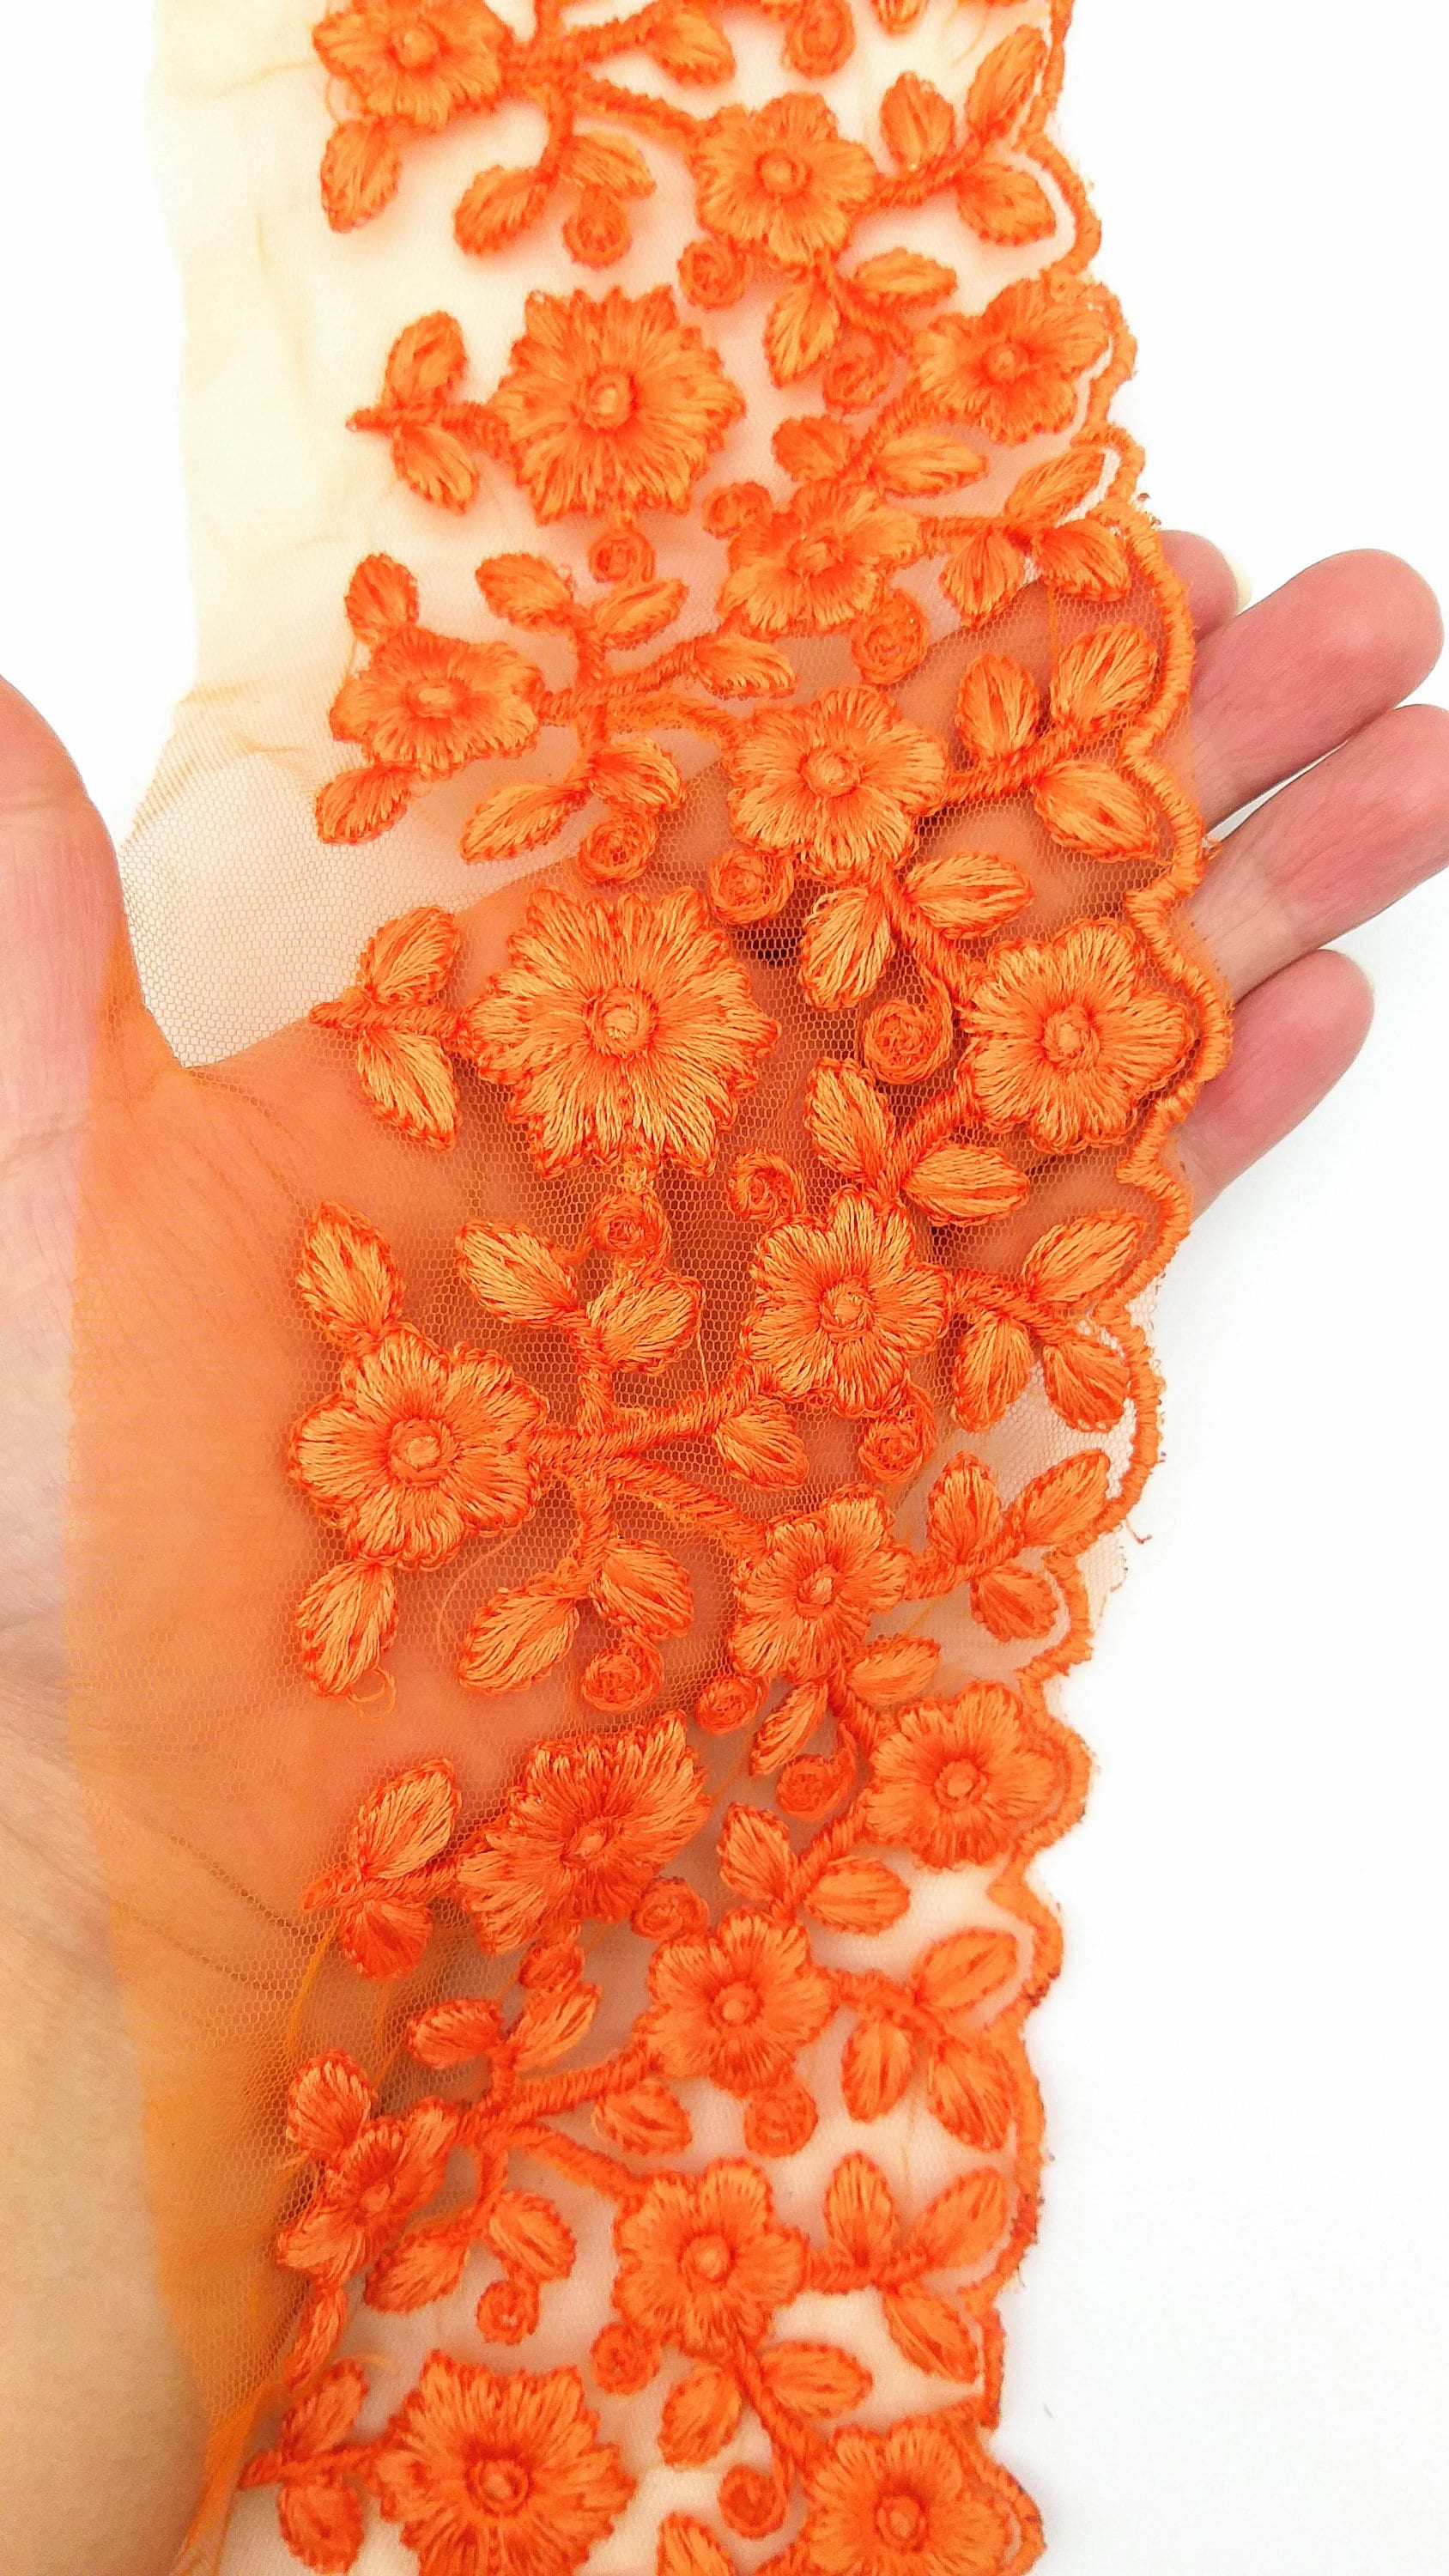 Buy Orange Net Fabric Lace Trim With Floral Embroidery in Orange, Lace  Trim, Sari Border, Embroidered Trim, Trim by Yard Online in India 